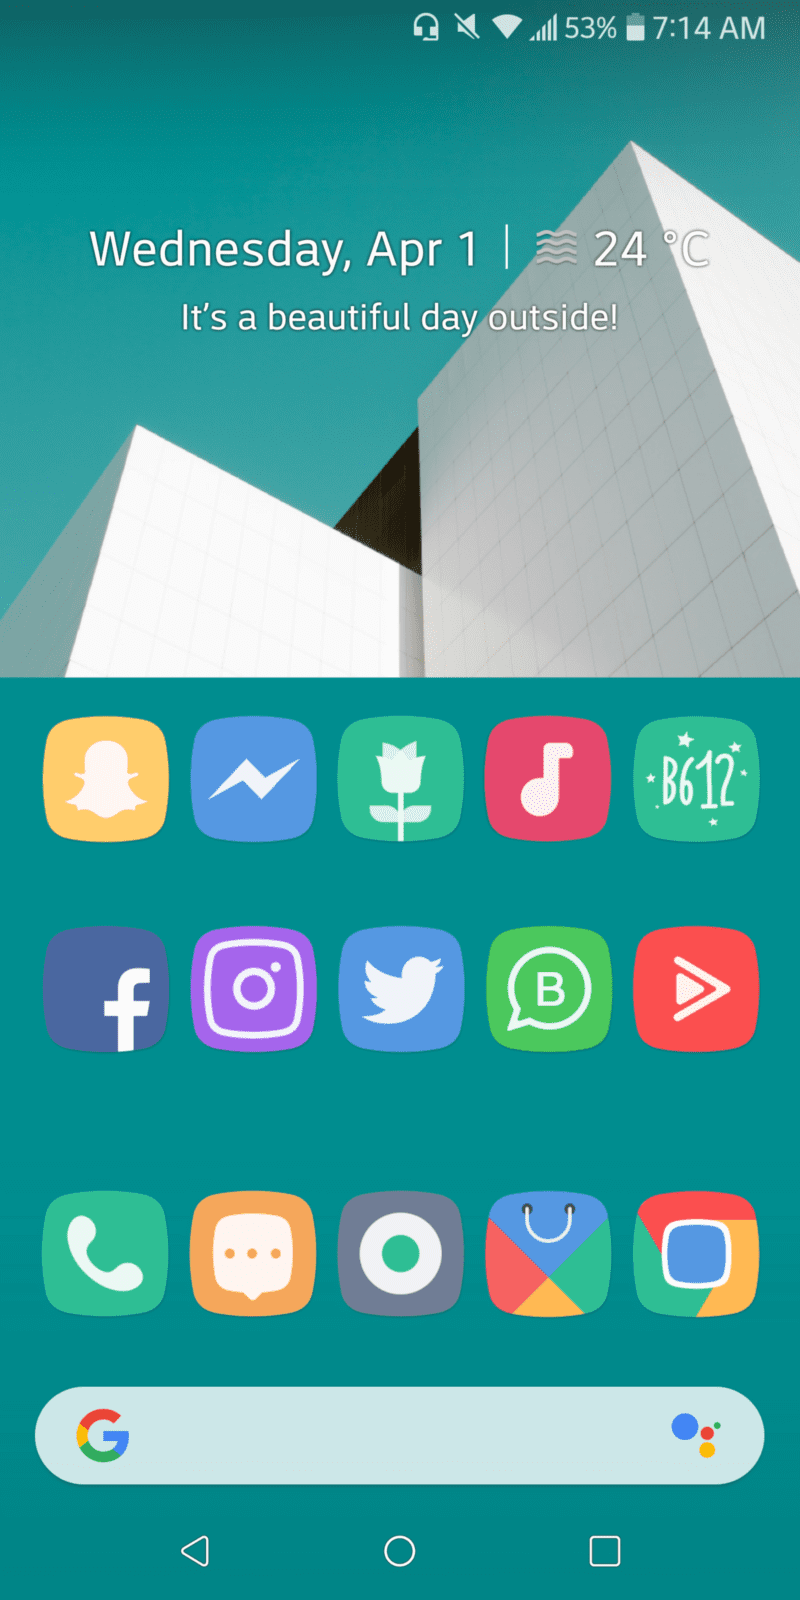 Android homescreen My Home Screen of LG G6